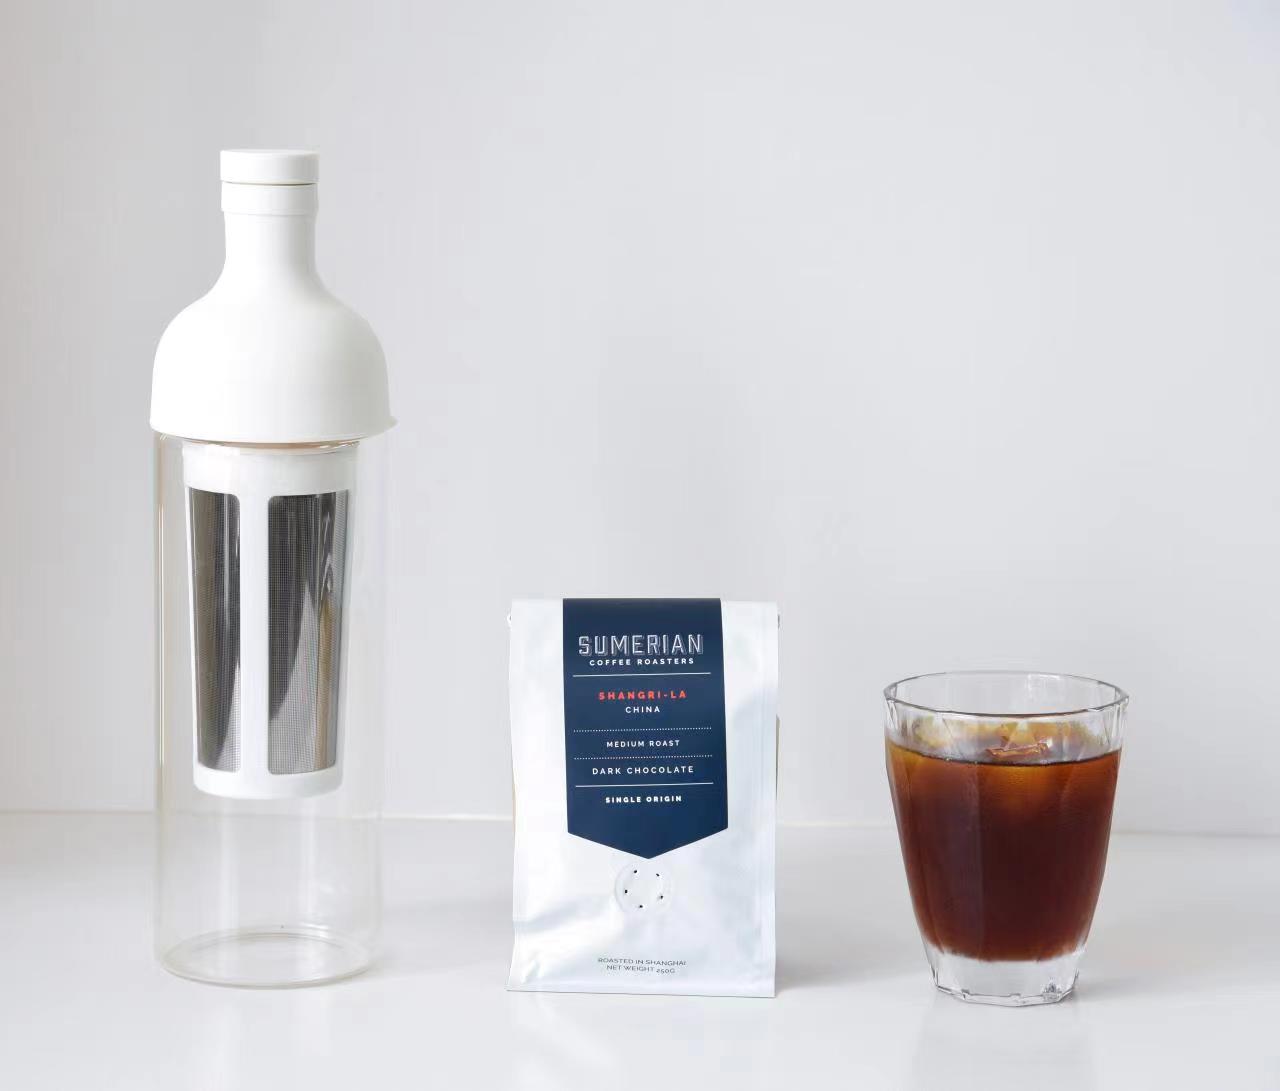 Cold Brew Coffee Made Simple with This Sleek Brewing Kit